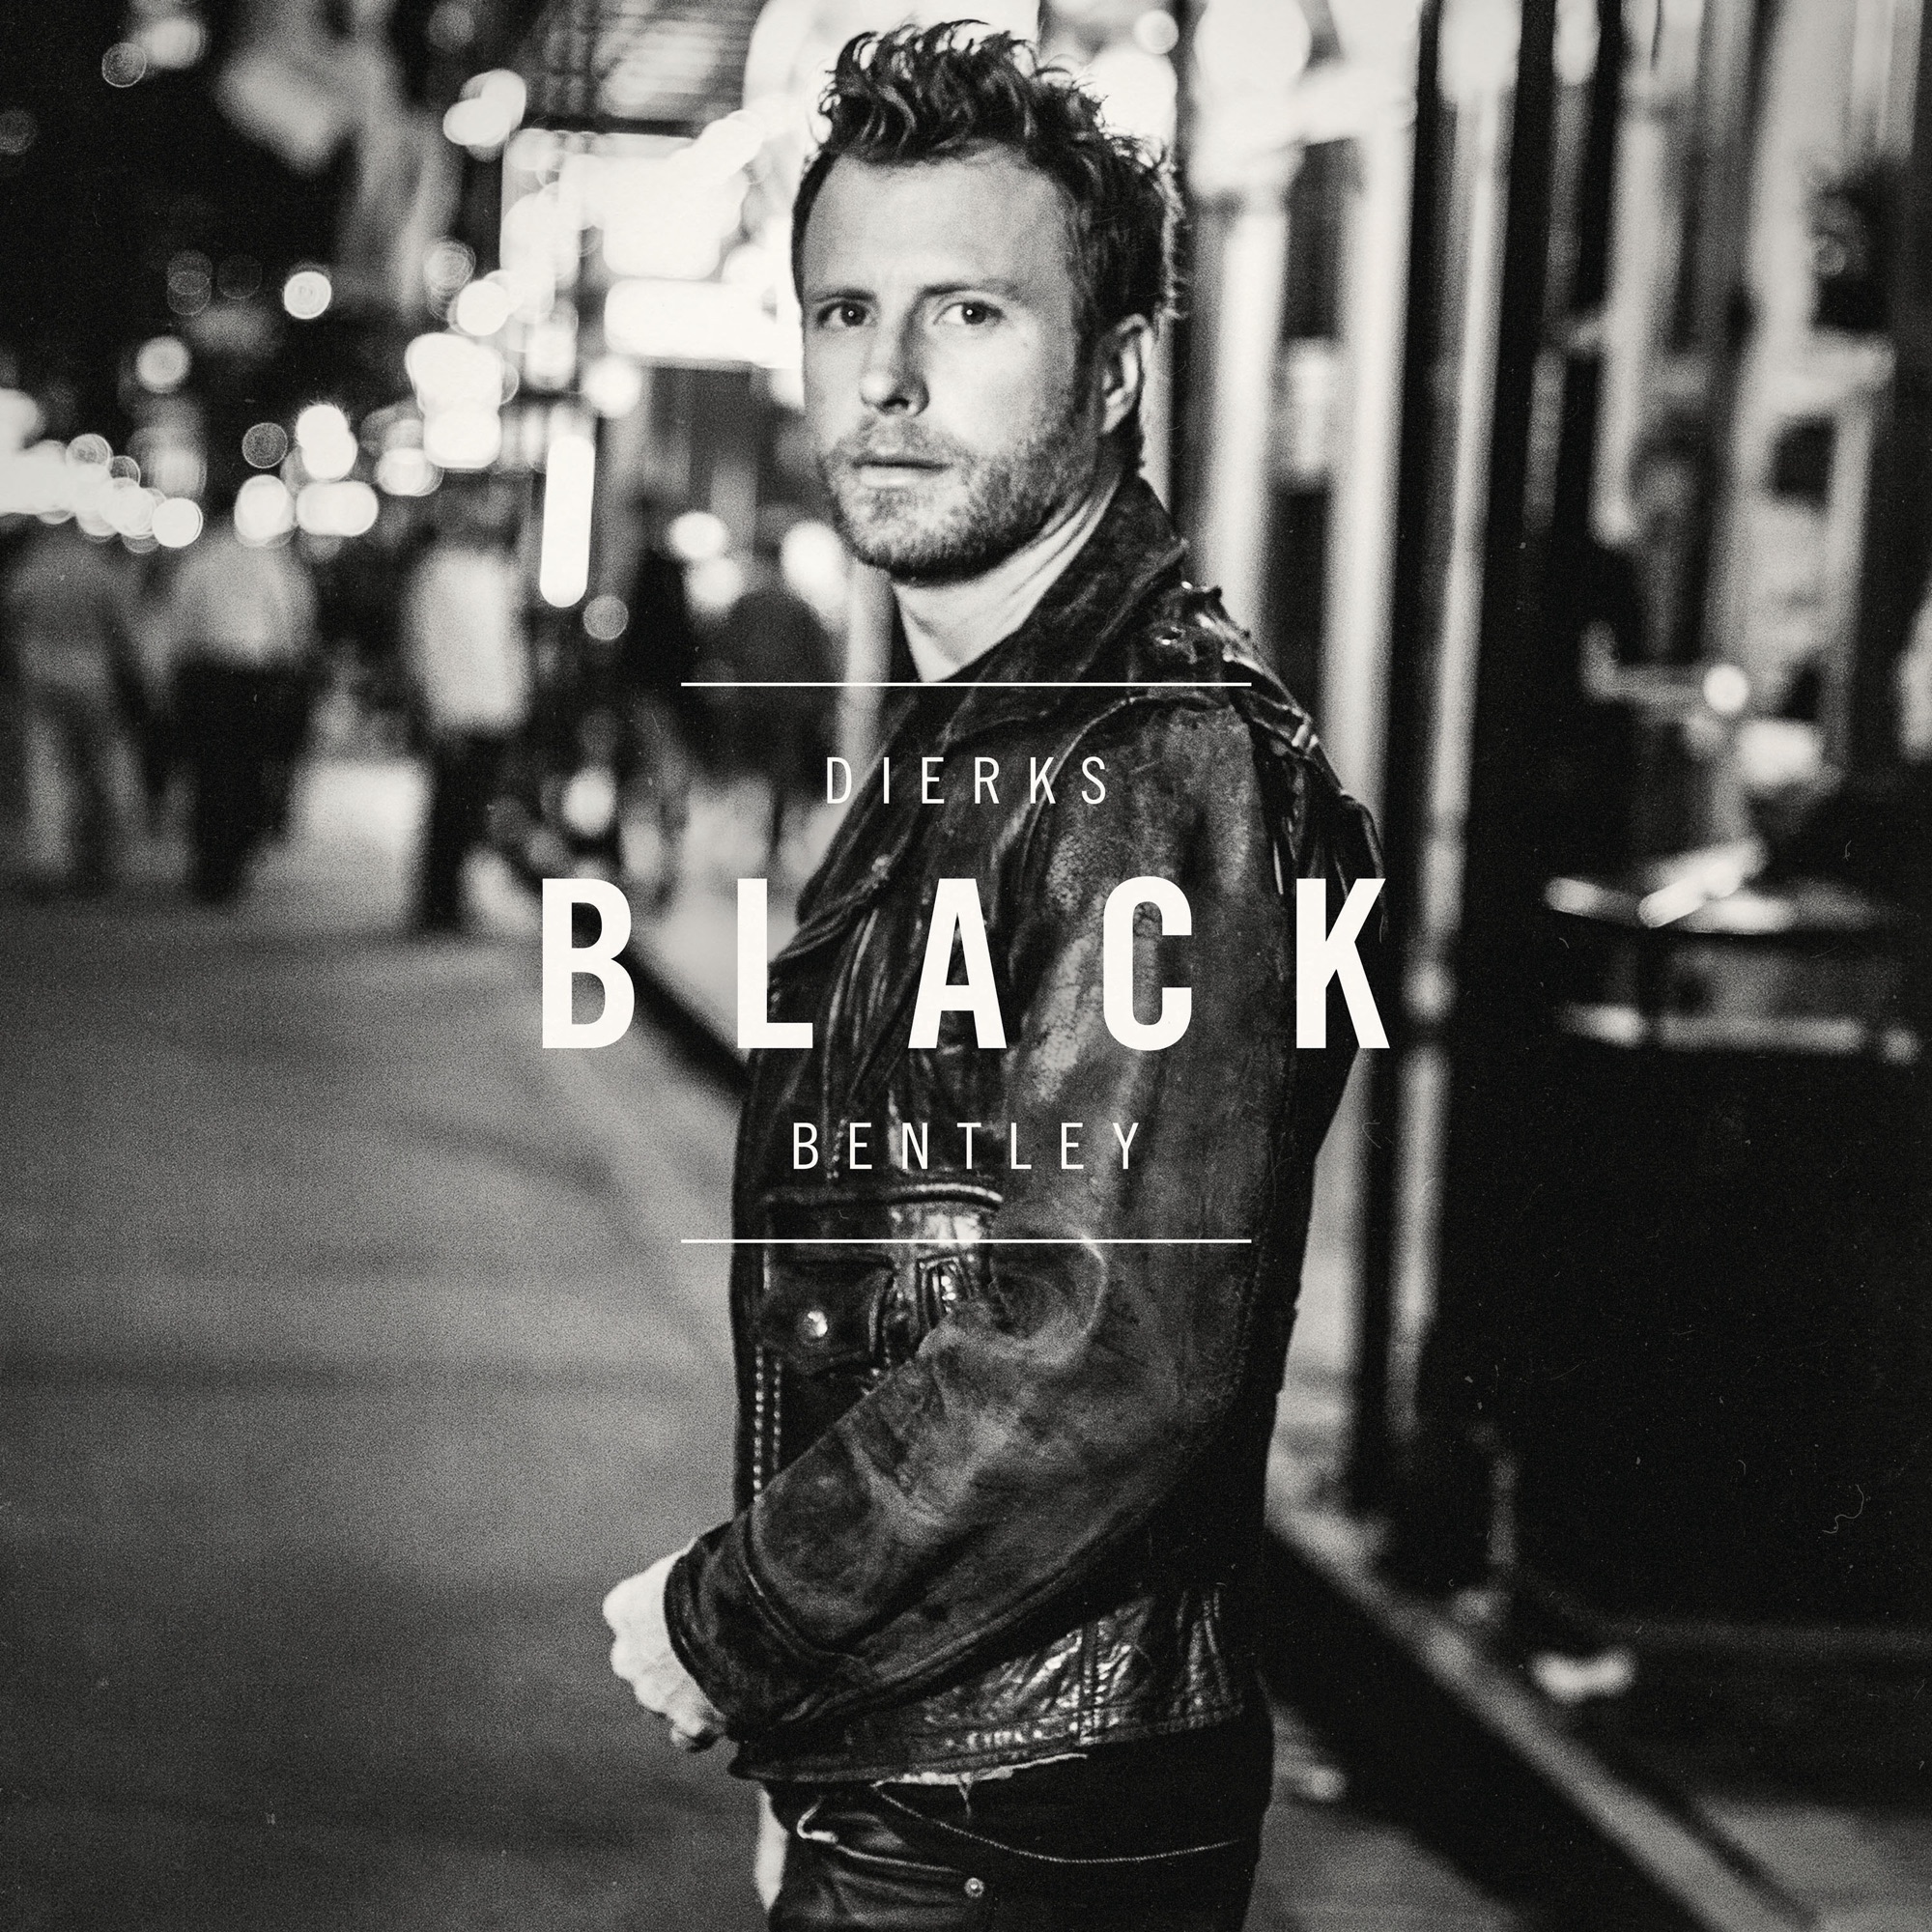 Art for Different for Girls (feat. Elle King) by Dierks Bentley